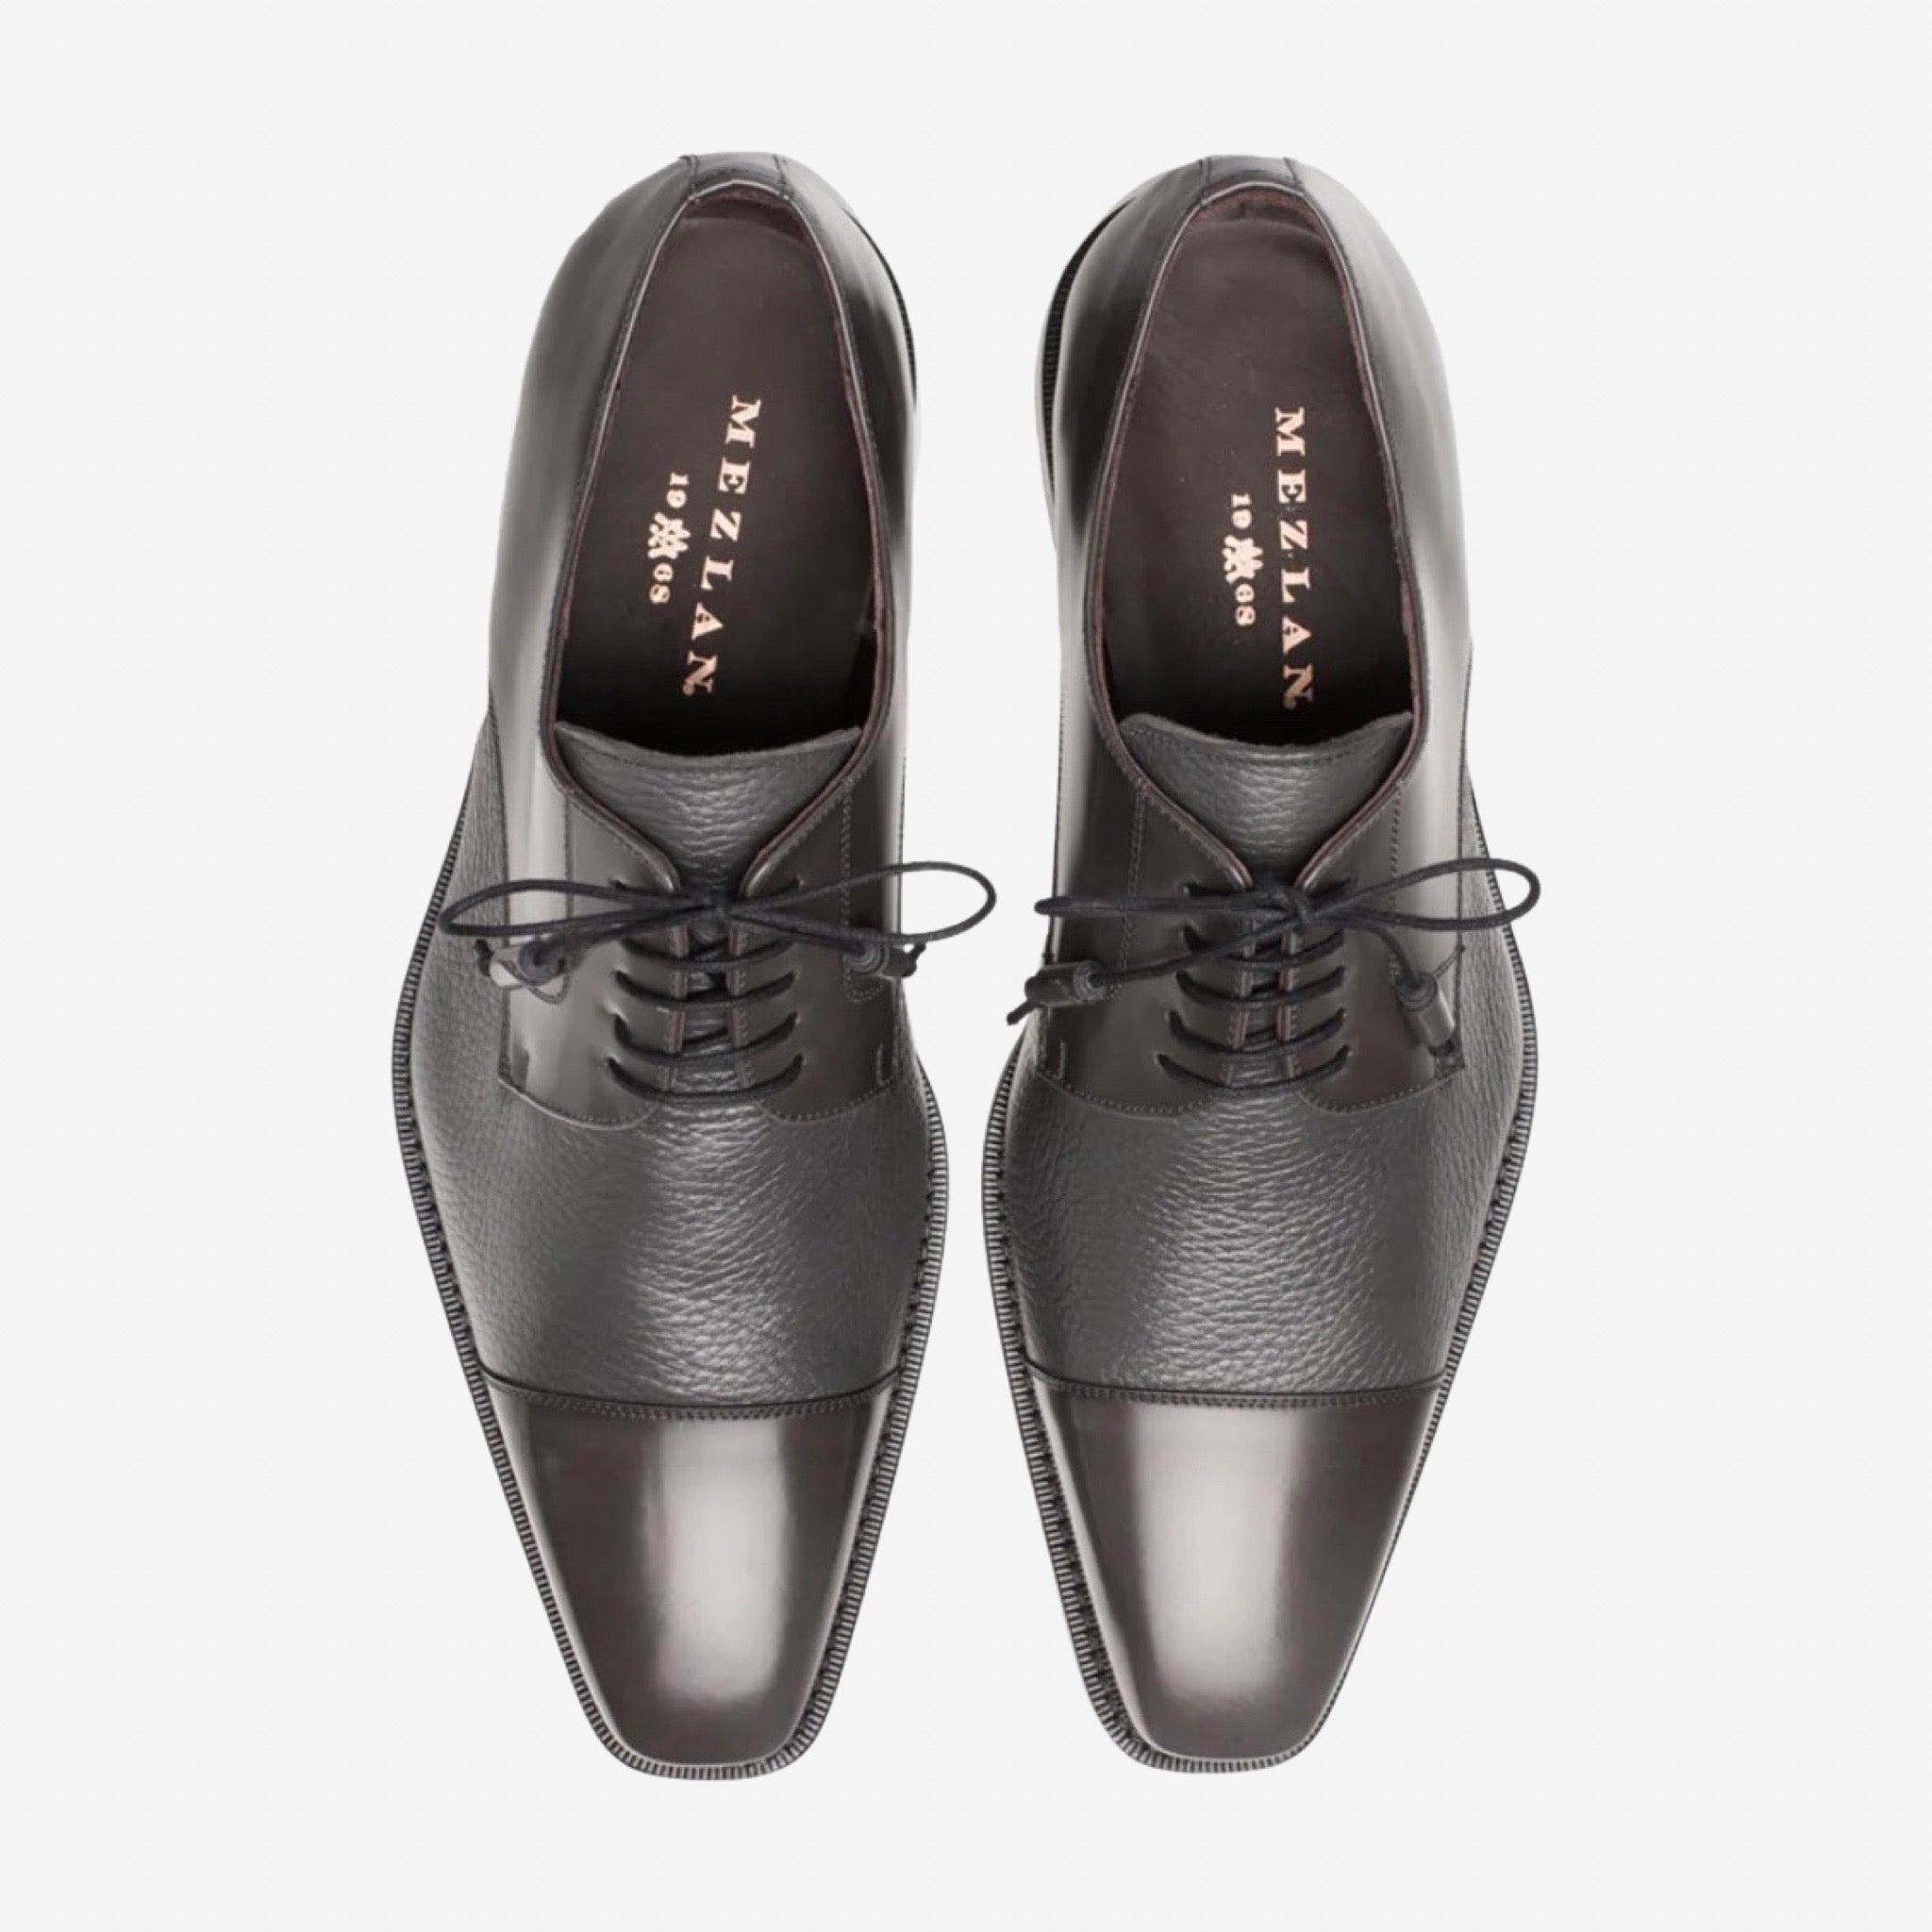 Grey Dress Shoes made in Spain